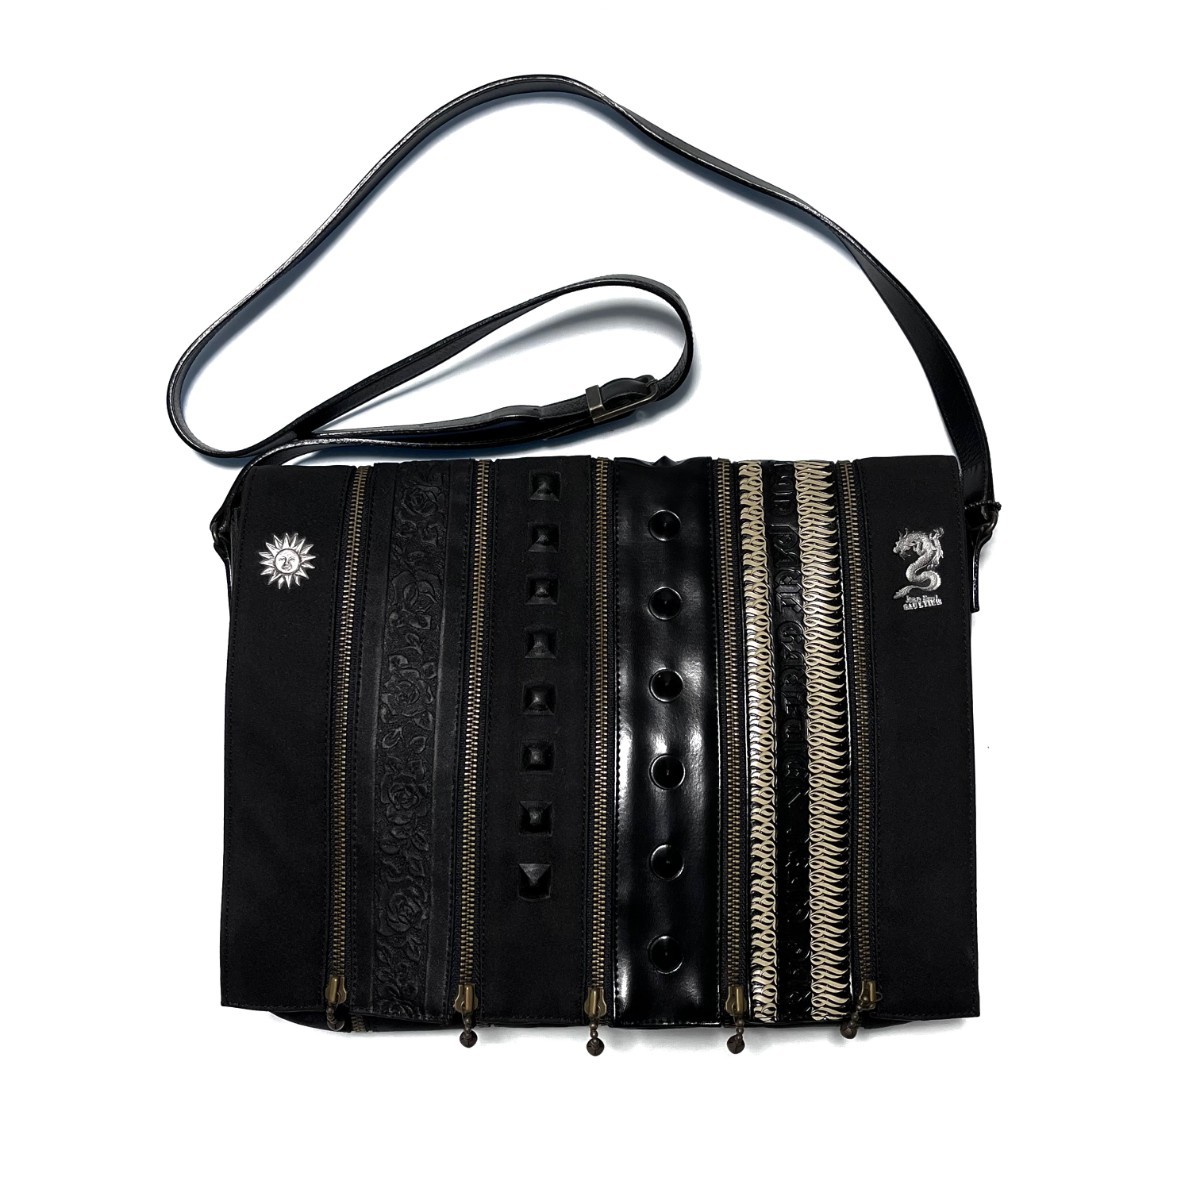 AW1995 Jean paul gaultier DRAGON LEATHER ZIP SHOULDER BAG リュバンジップ ショルダー ボディ バッグ ゴルチエ 90s archive vintage